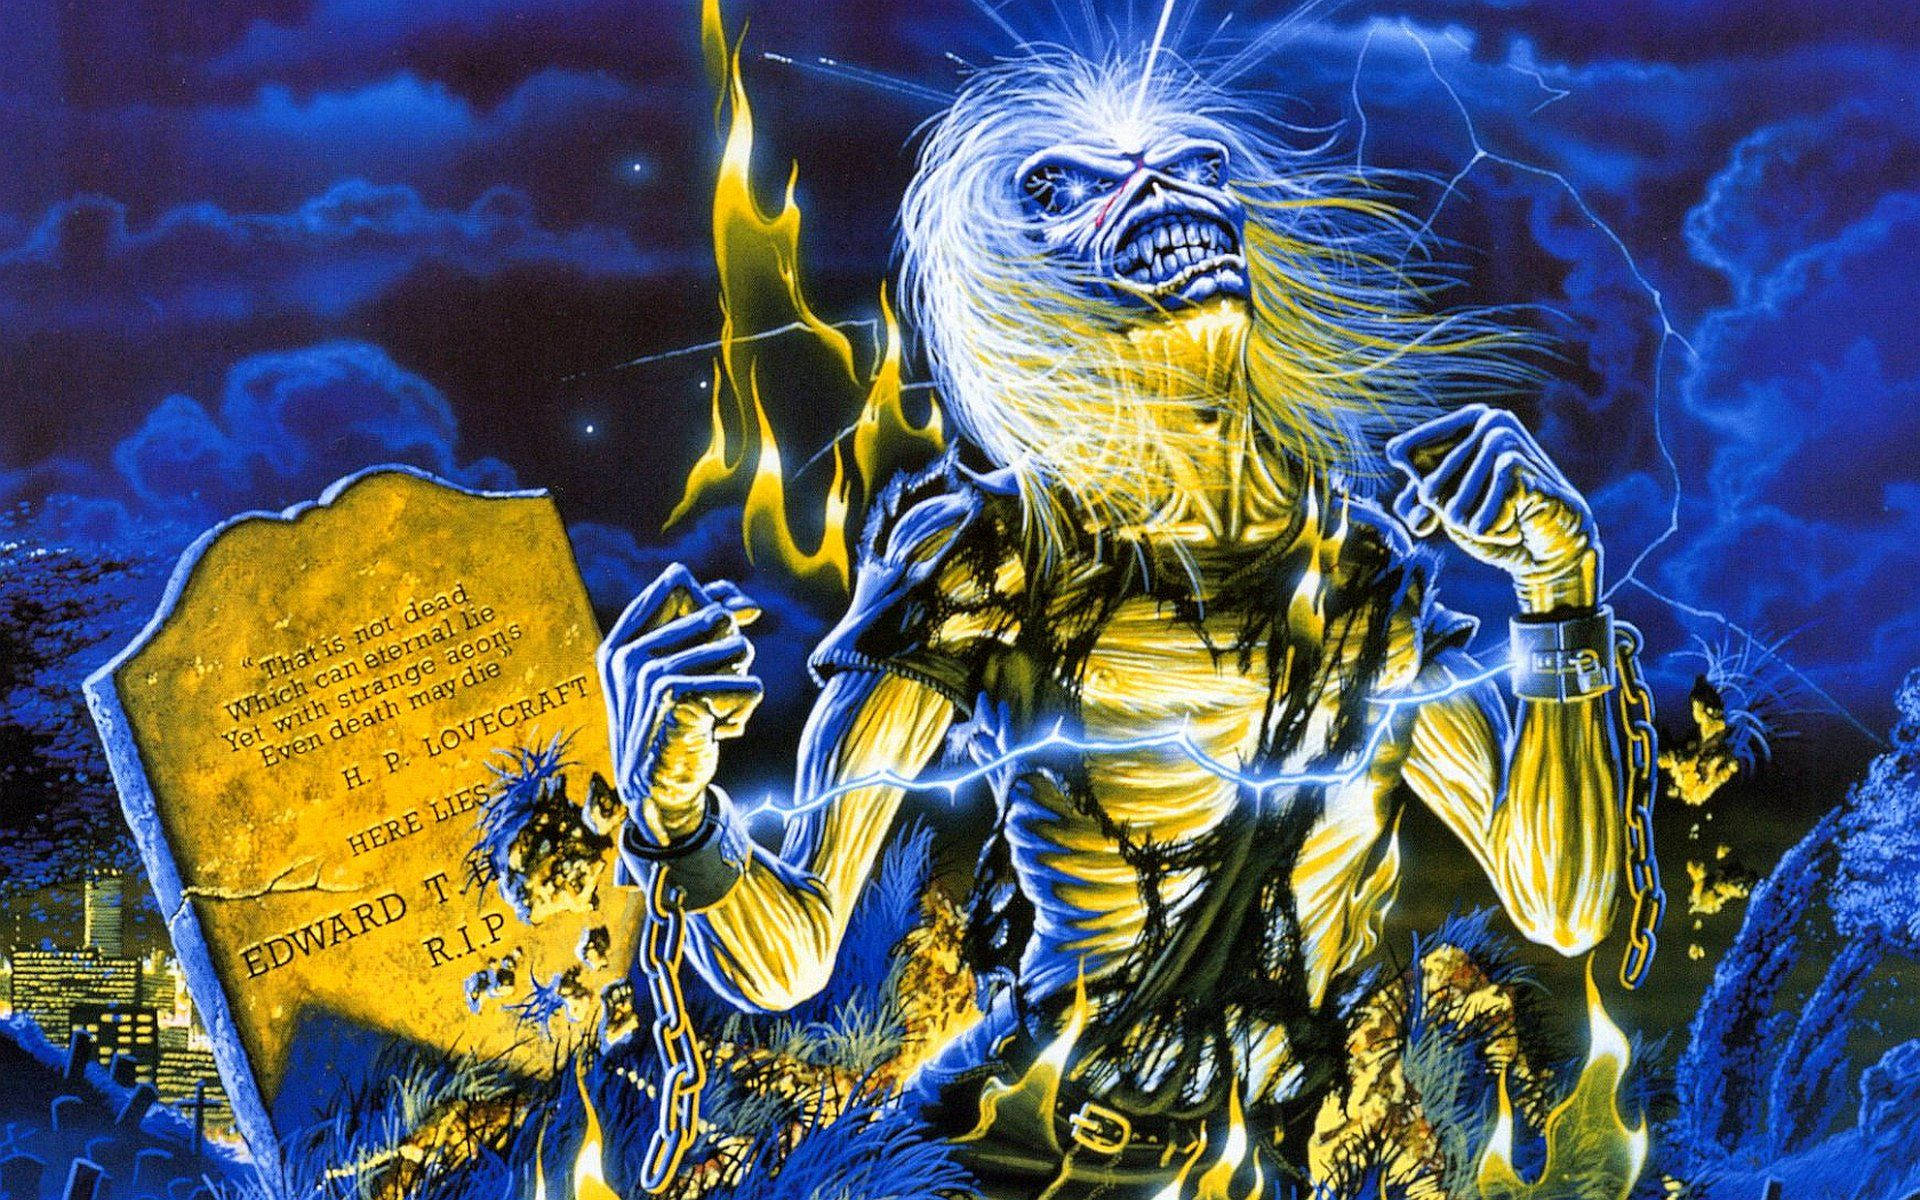 Iron Maiden - Rising from the Grave Wallpaper